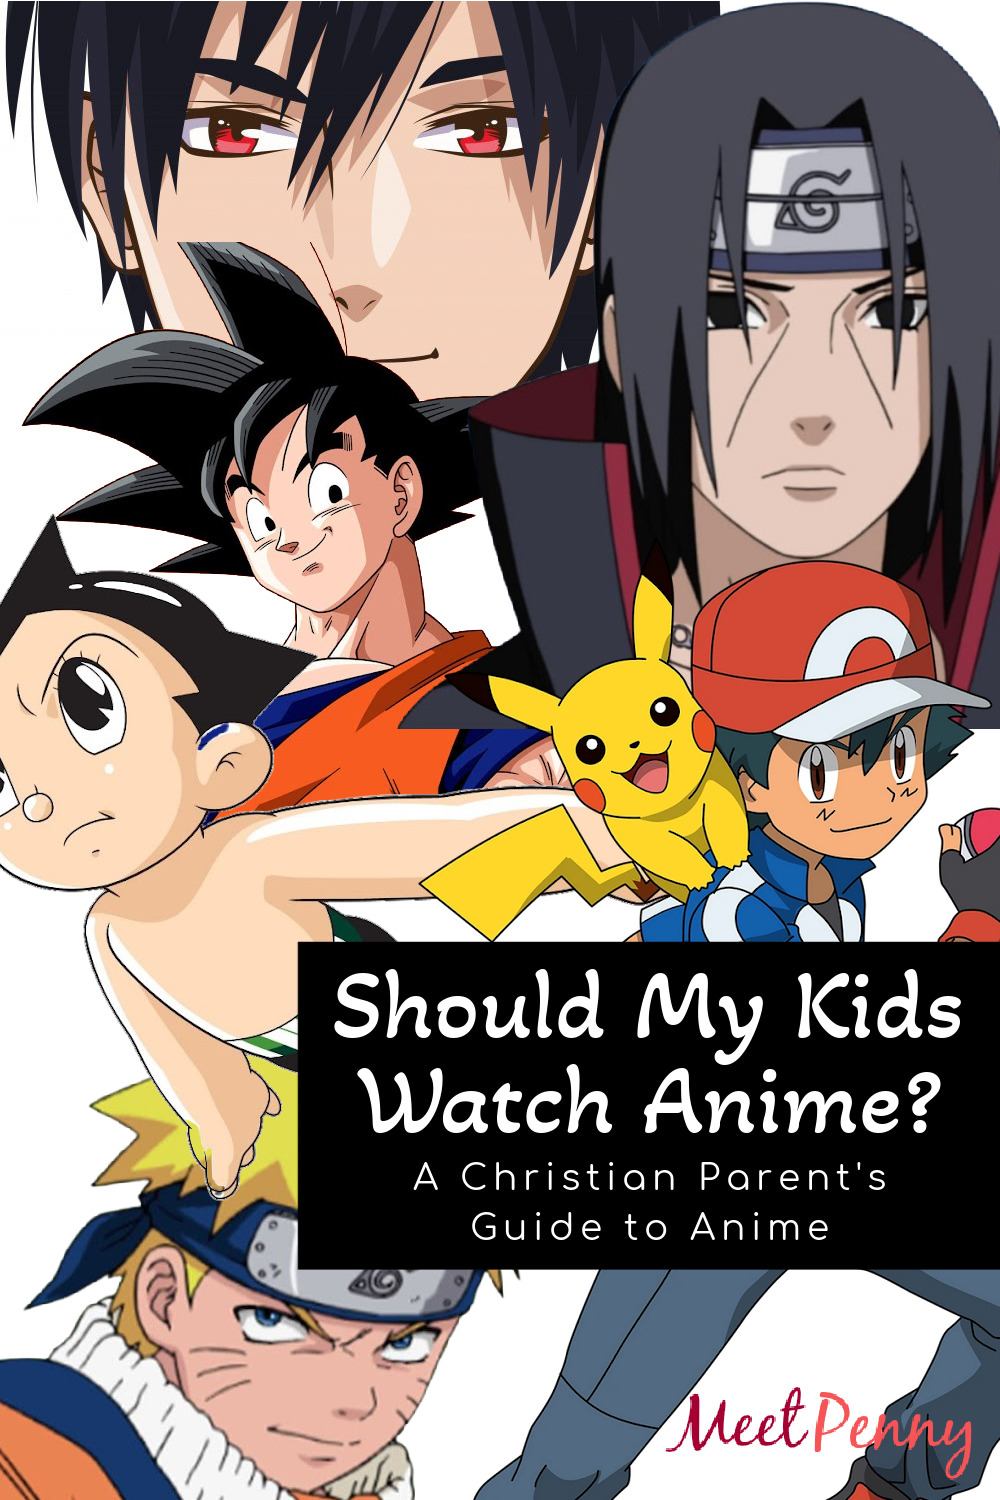 Can Christians watch anime? Should my child watch anime? What is anime anyway?